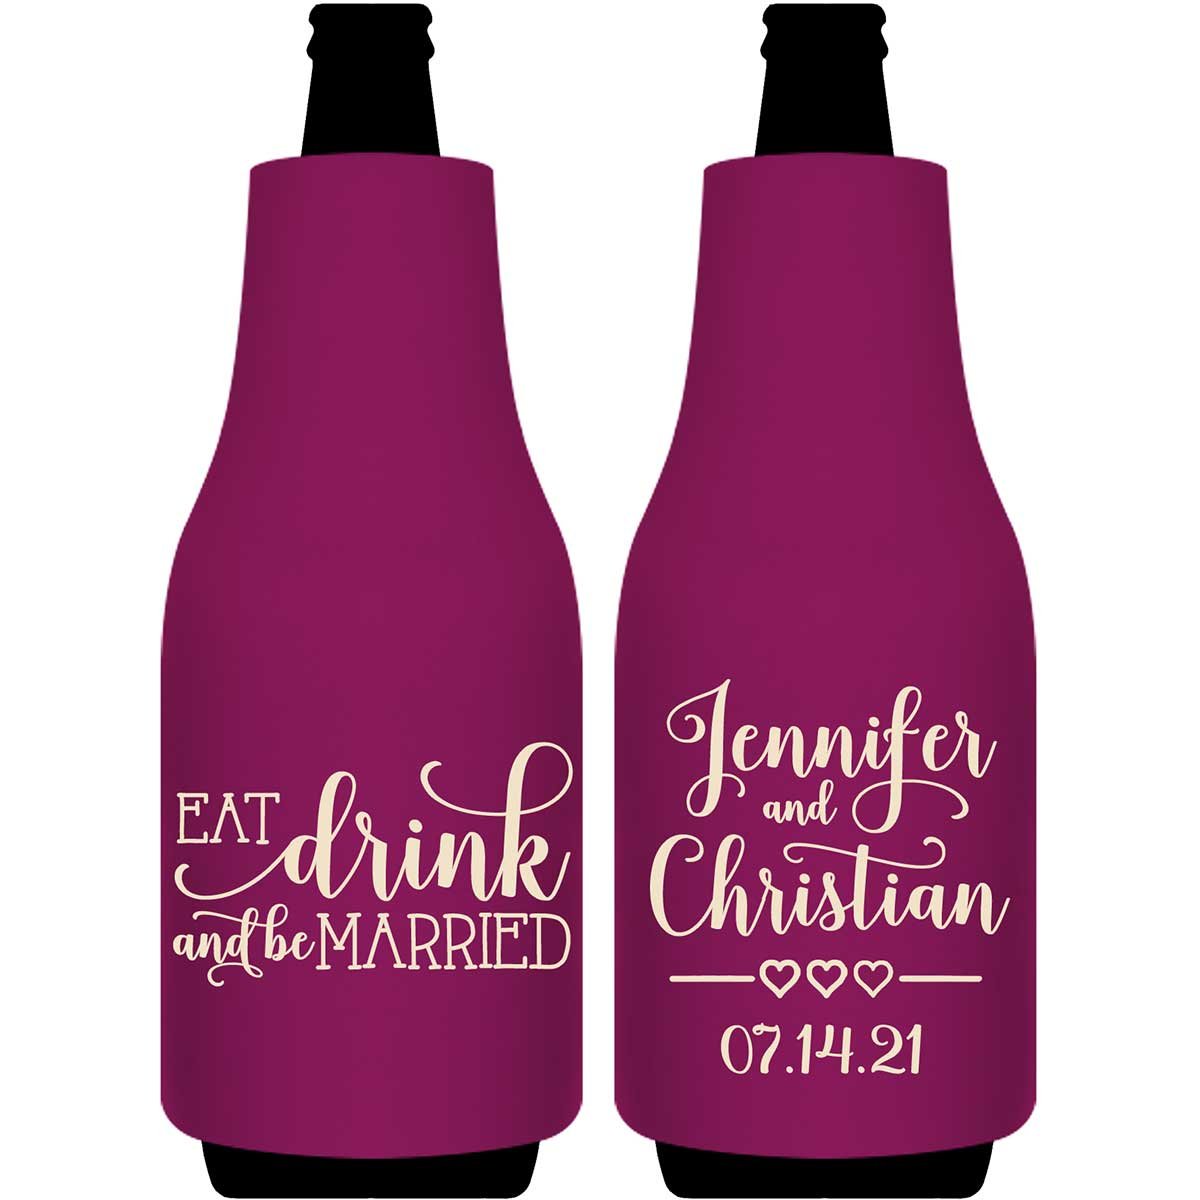 Eat Drink And Be Married 6A Foldable Bottle Sleeve Koozies Wedding Gifts for Guests